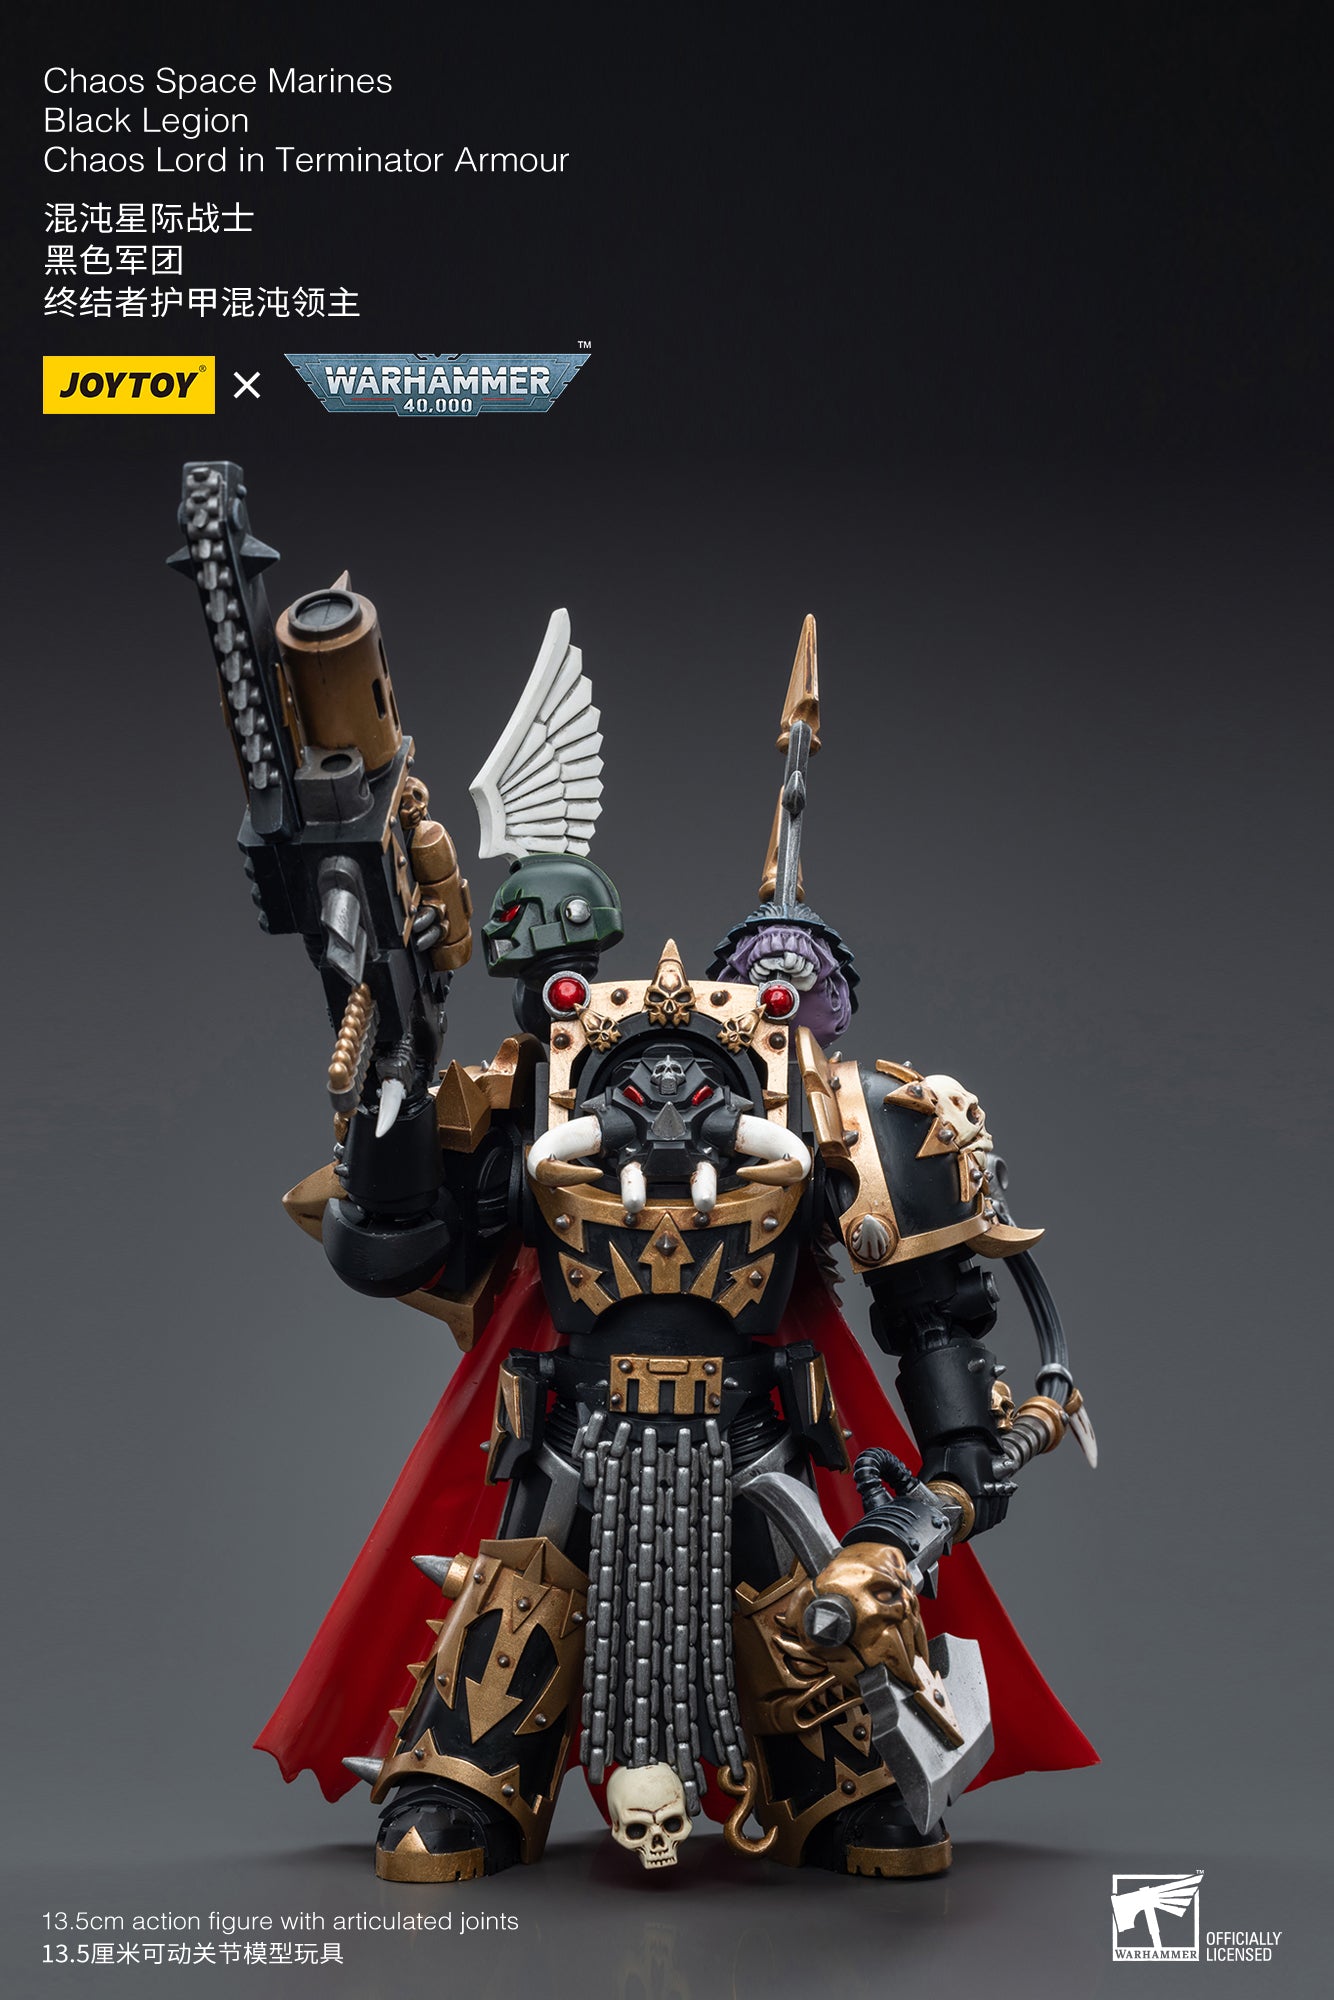 Warhammer 40K Action Figure By JOYTOY - Chaos Space Marines Black Legion  Chaos Lord in Terminator Armour – LT Cave